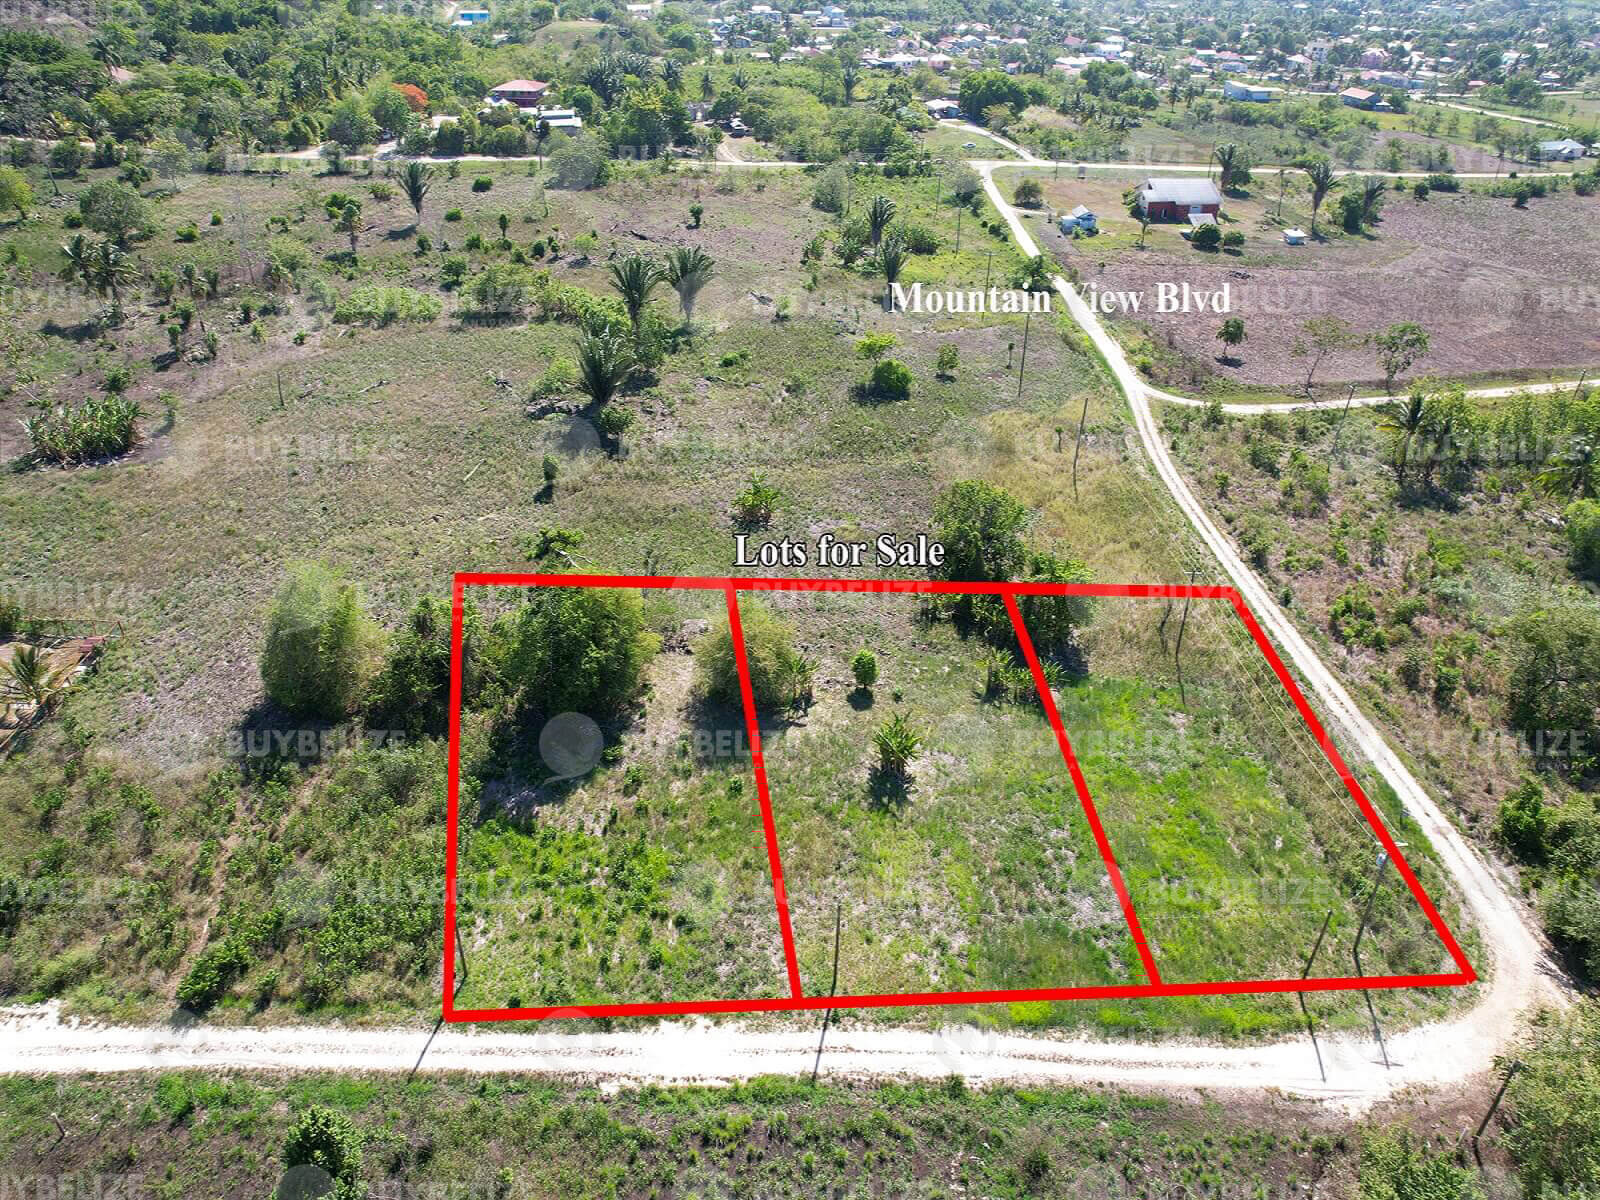 3 large residential lots with panoramic view of Belmopan City